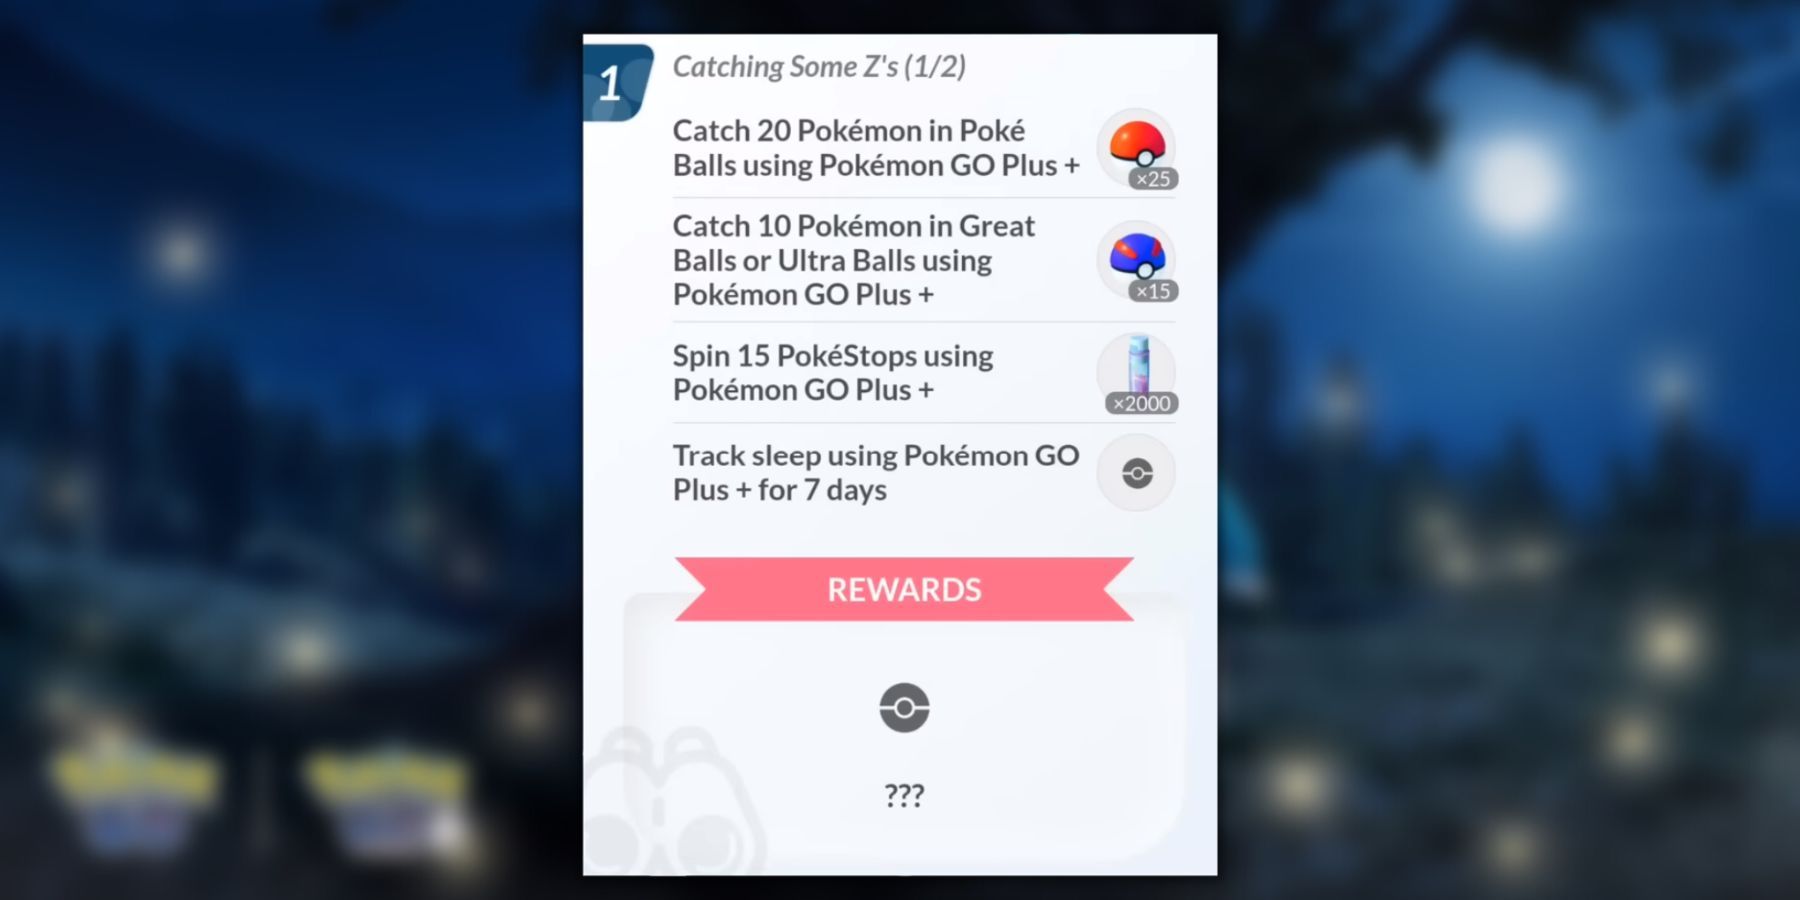 image showing catching some z's event tasks in pokemon go.